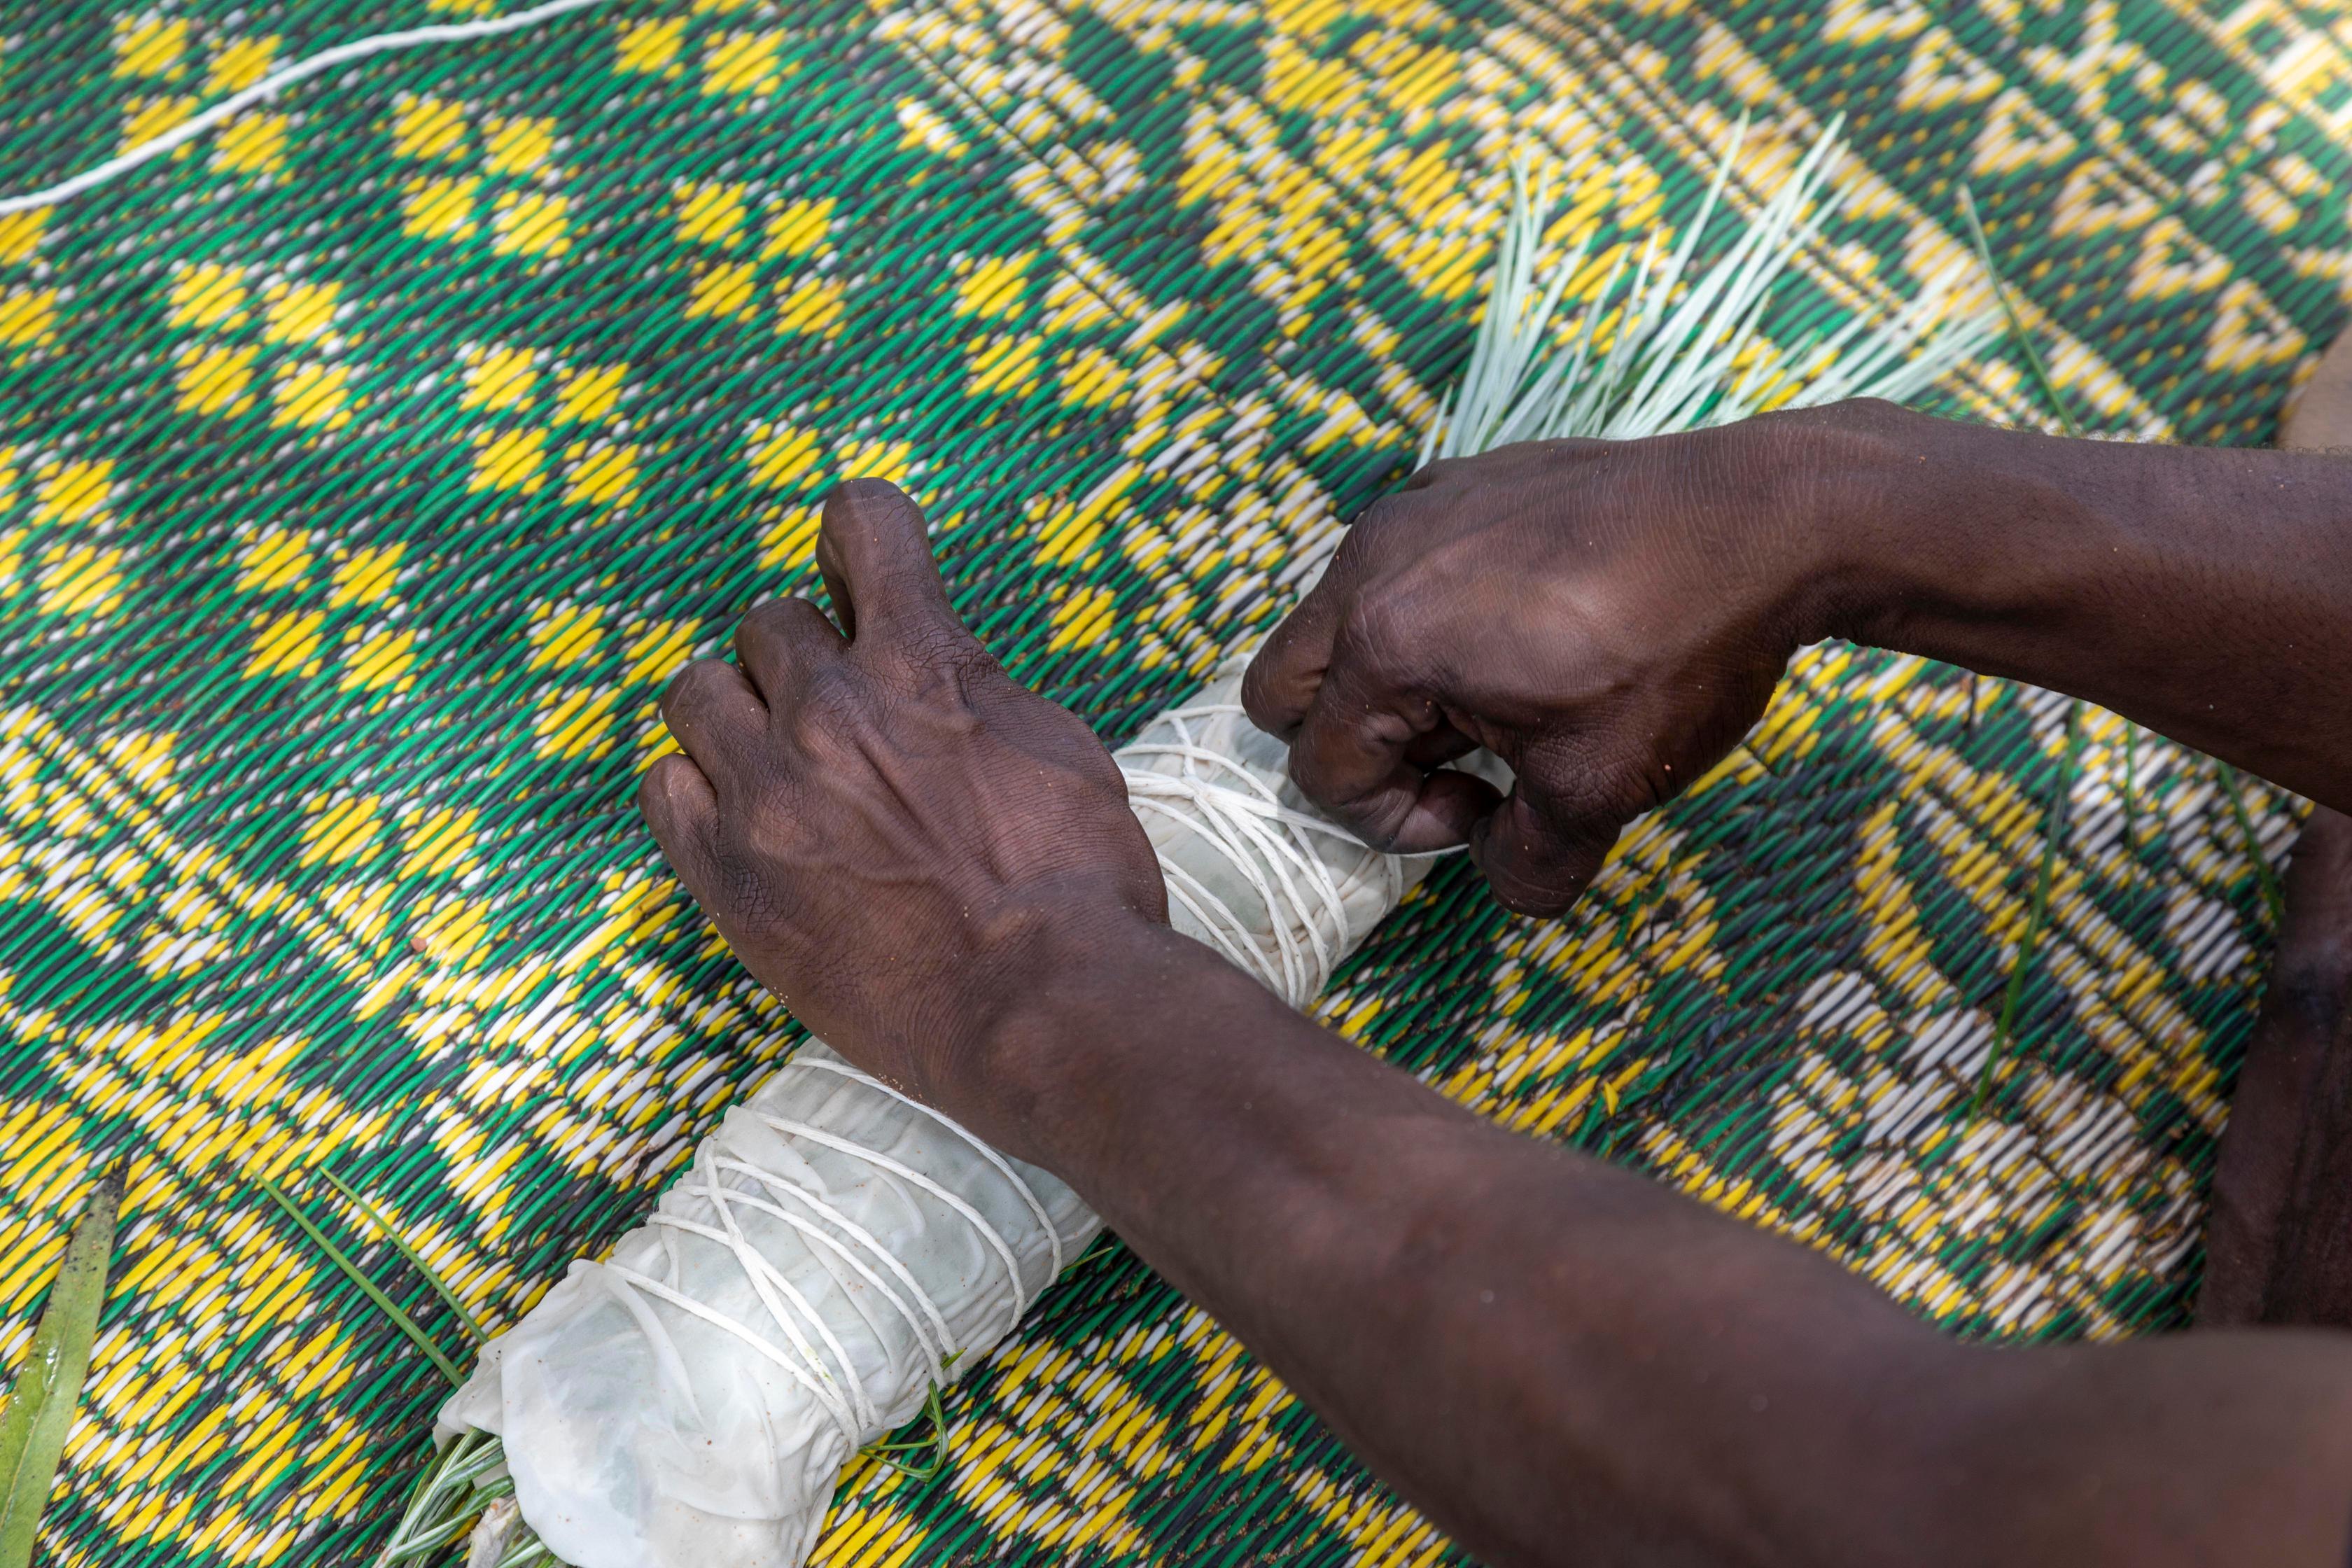 Two hands wrapping a bundle of grass with white fabric and string on a green and yellow mat.